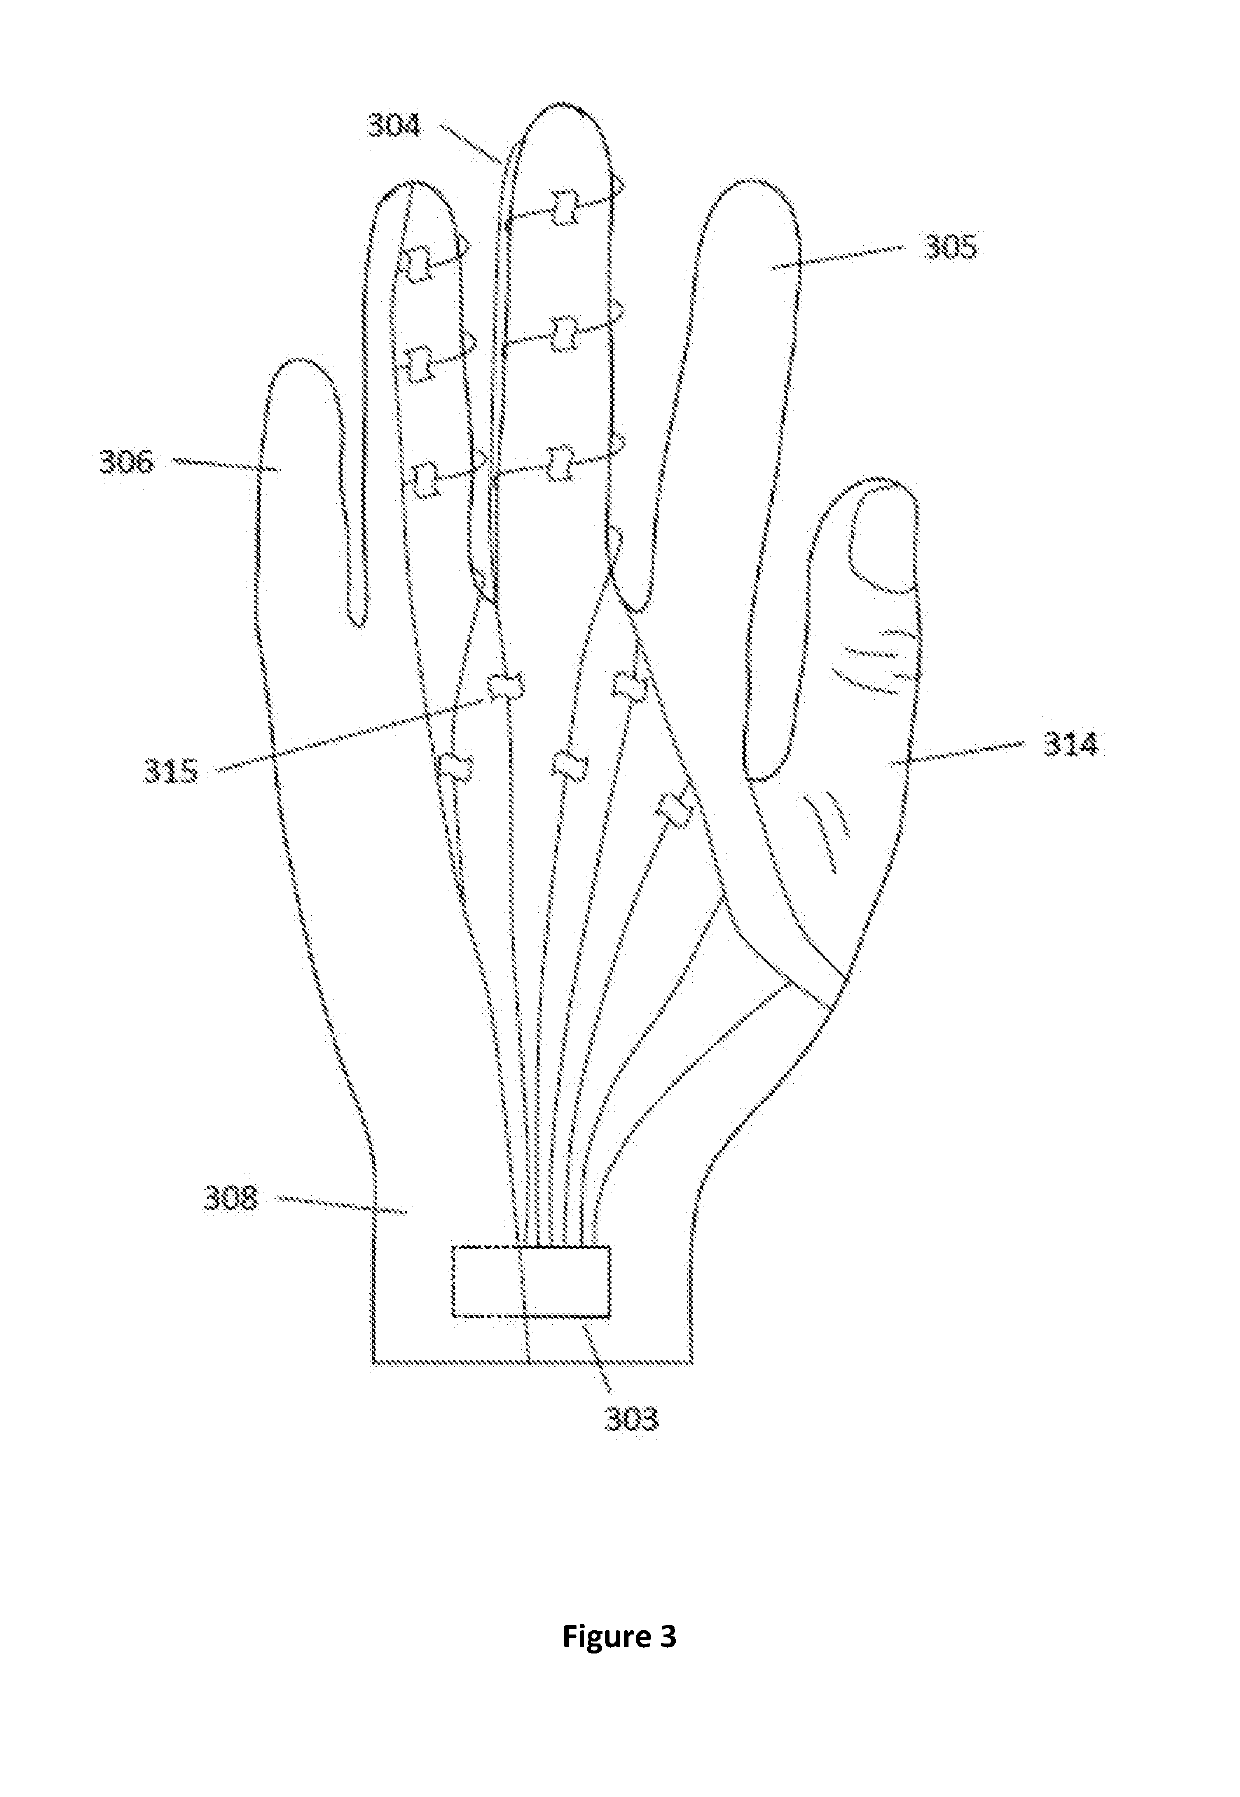 Electrically heated gloves